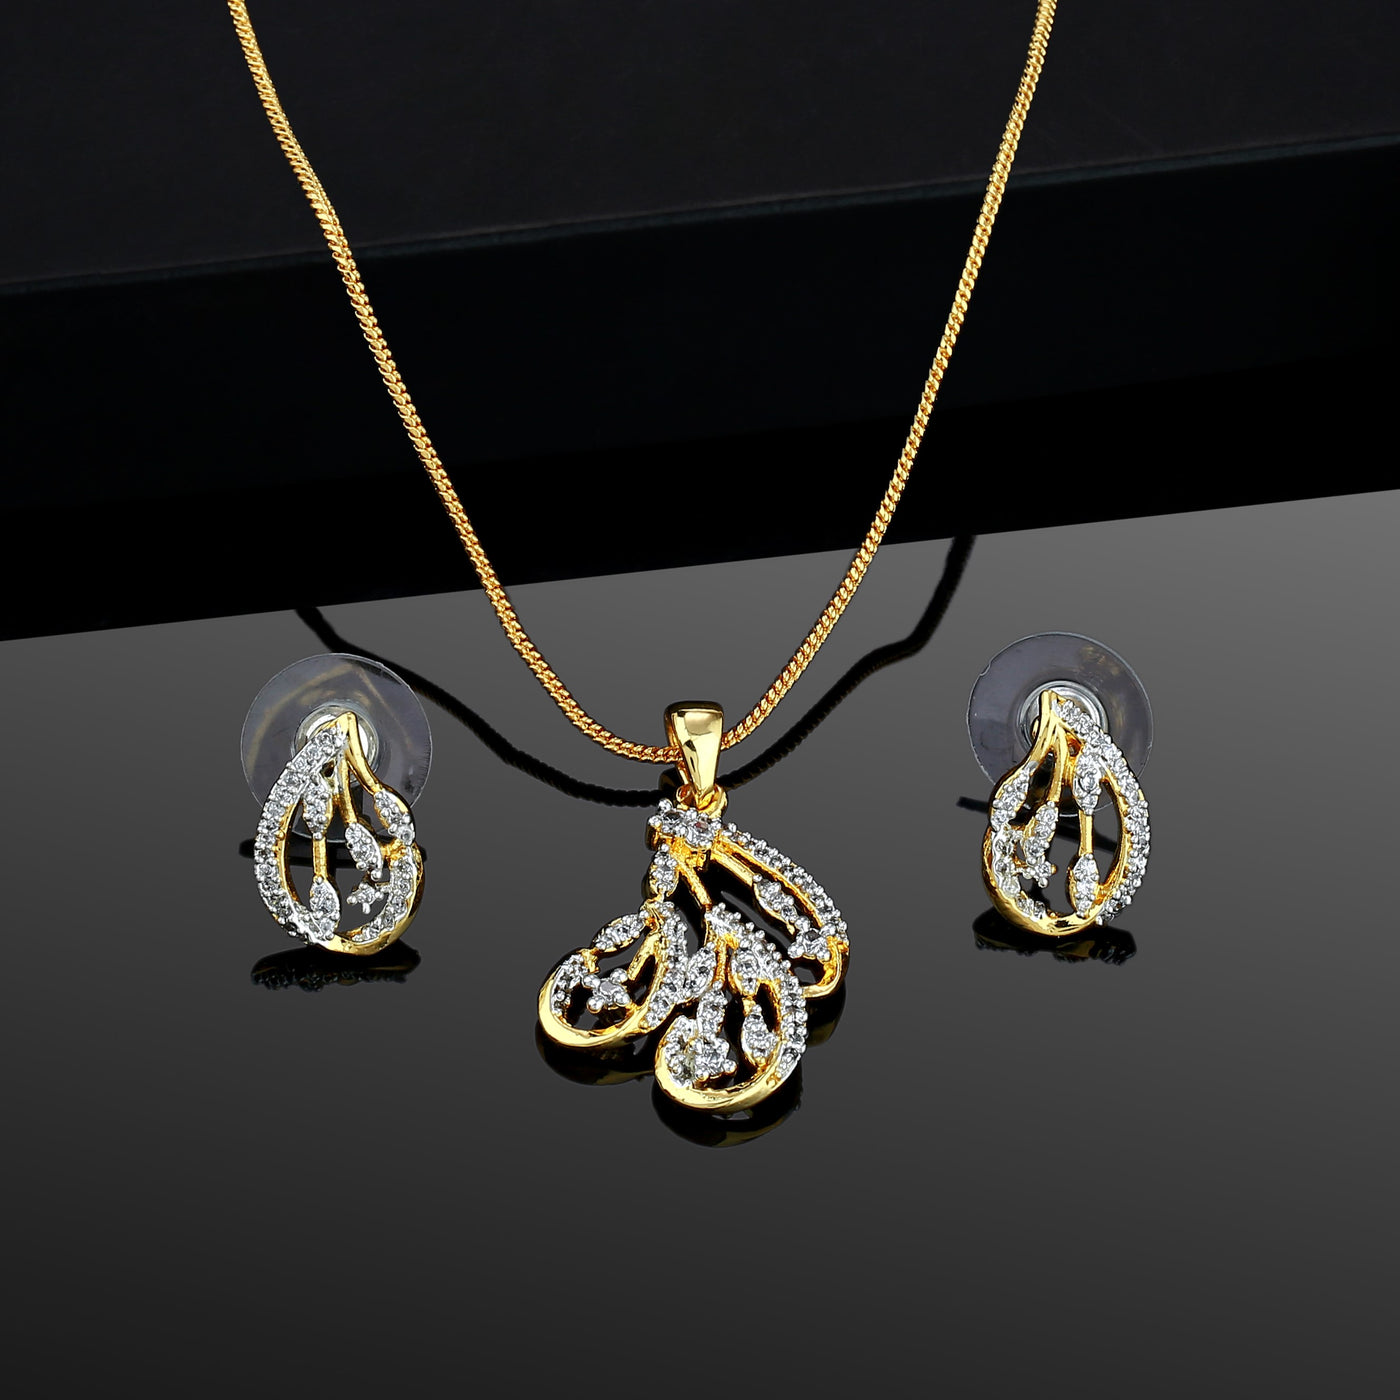 Estele 24 Kt Gold Plated Halo shaped American Diamond Necklace Set for Women / Girls